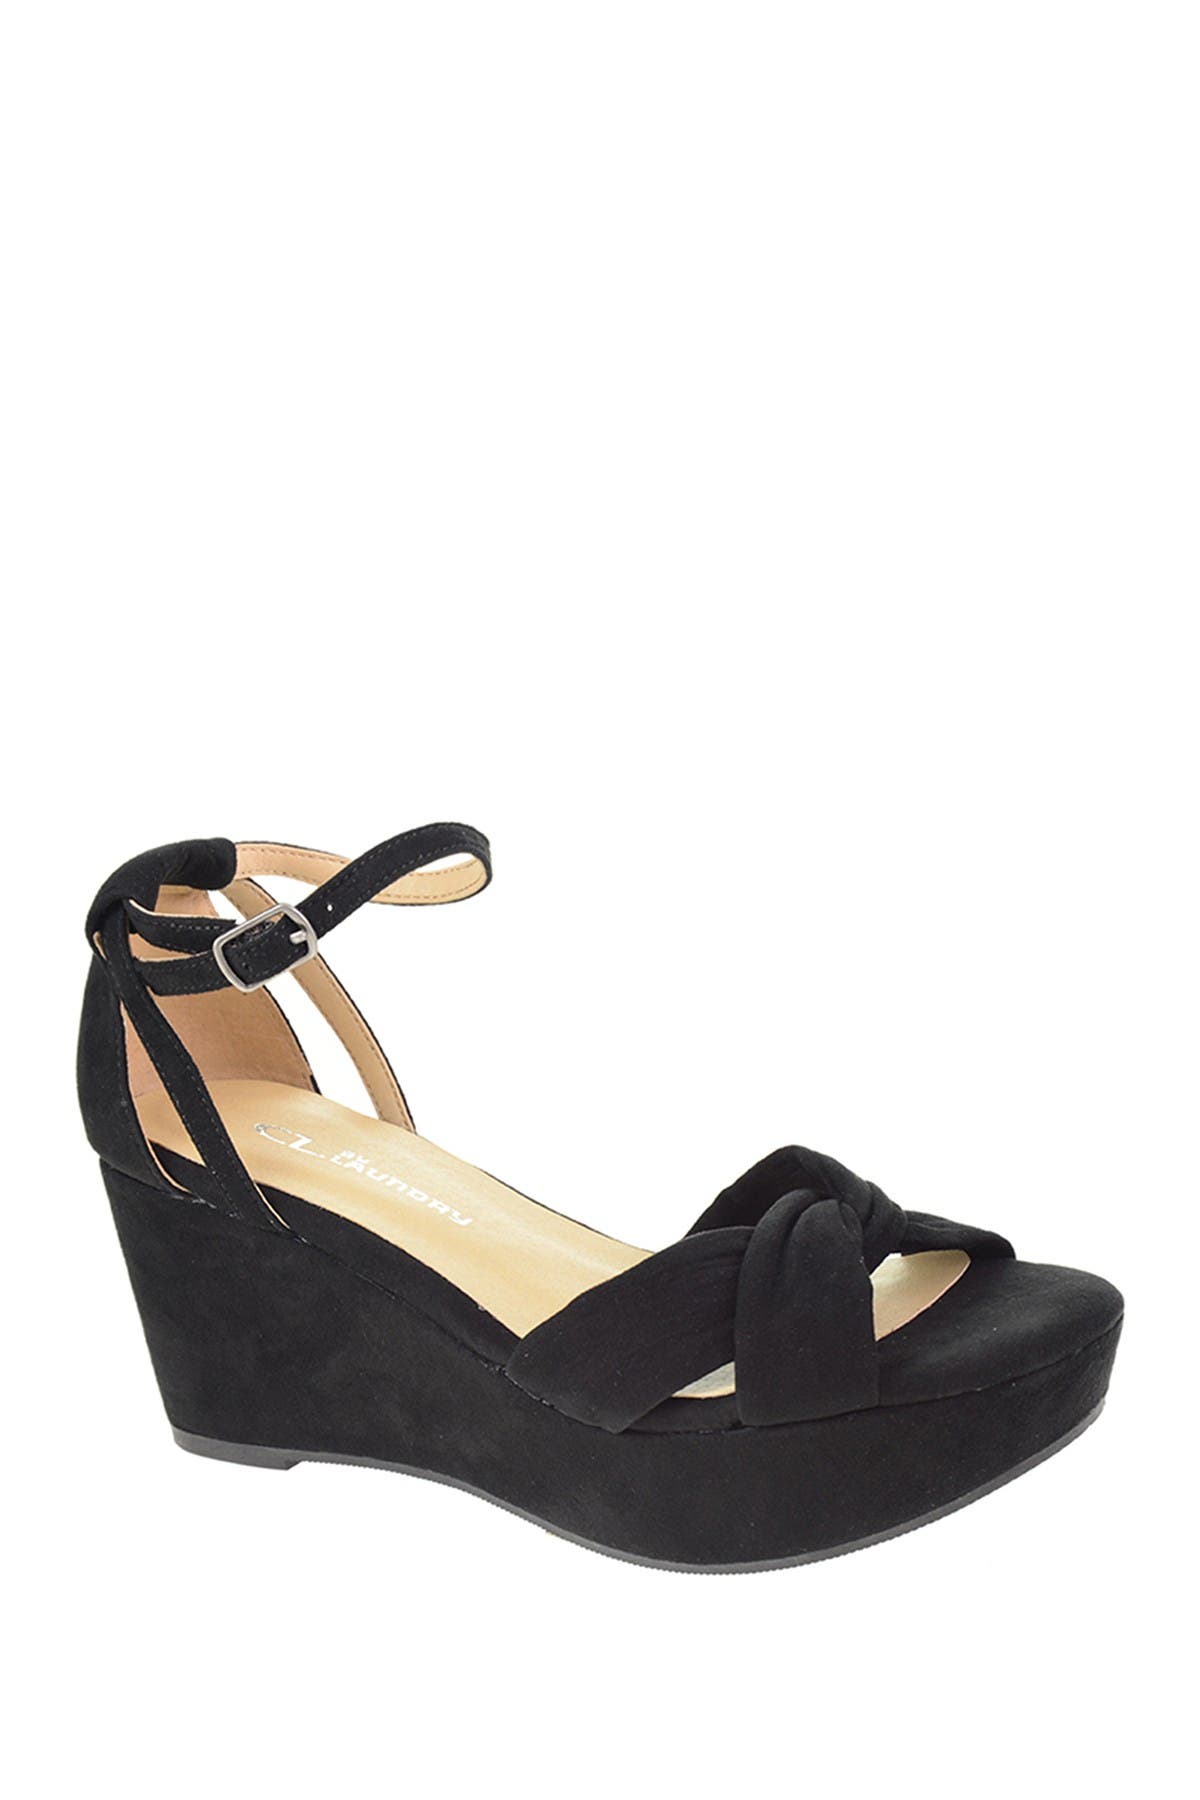 CL by Laundry | Devin Wedge Platform 